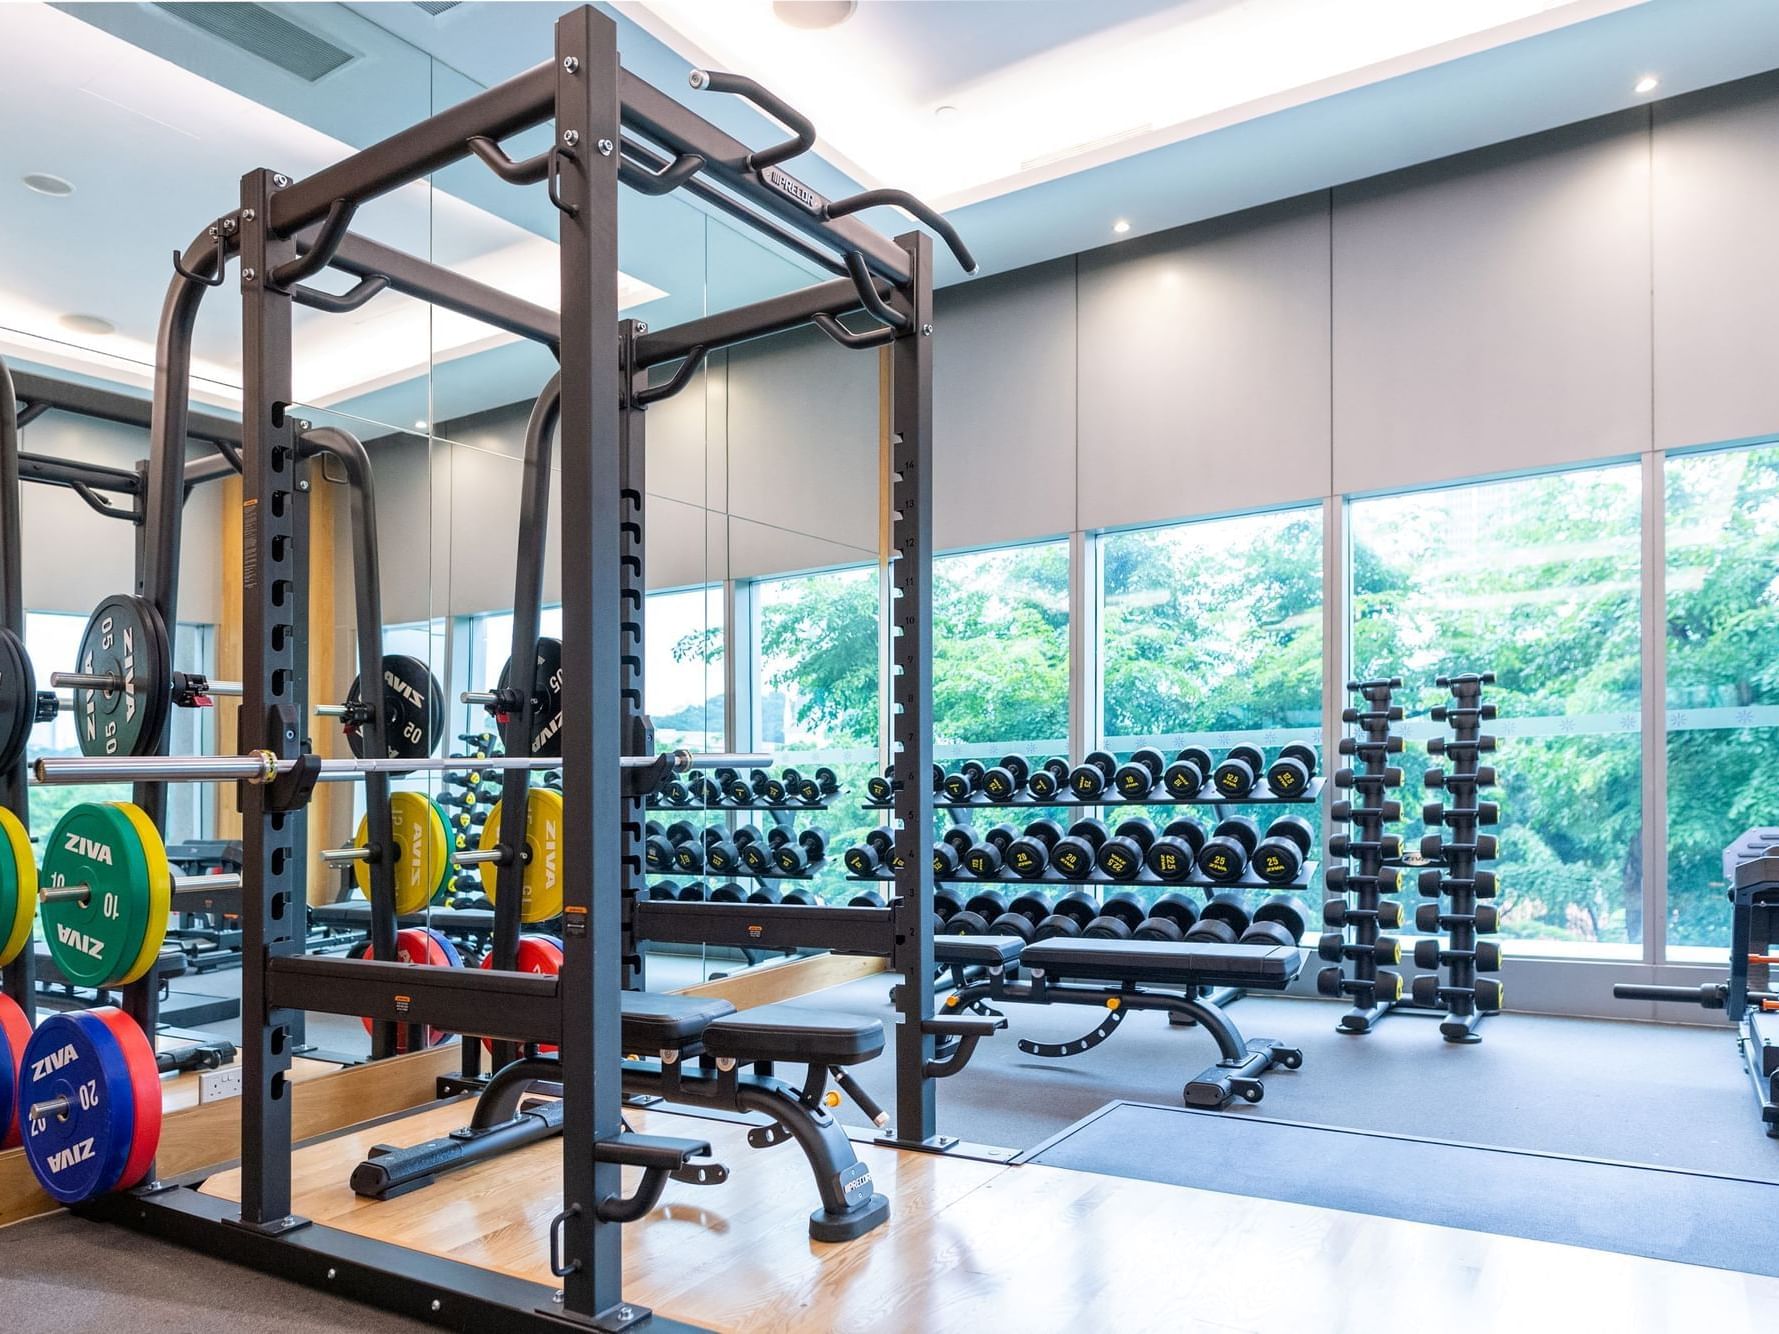 Barbell rack, weights & benches in the gym at Carlton Hotel Singapore